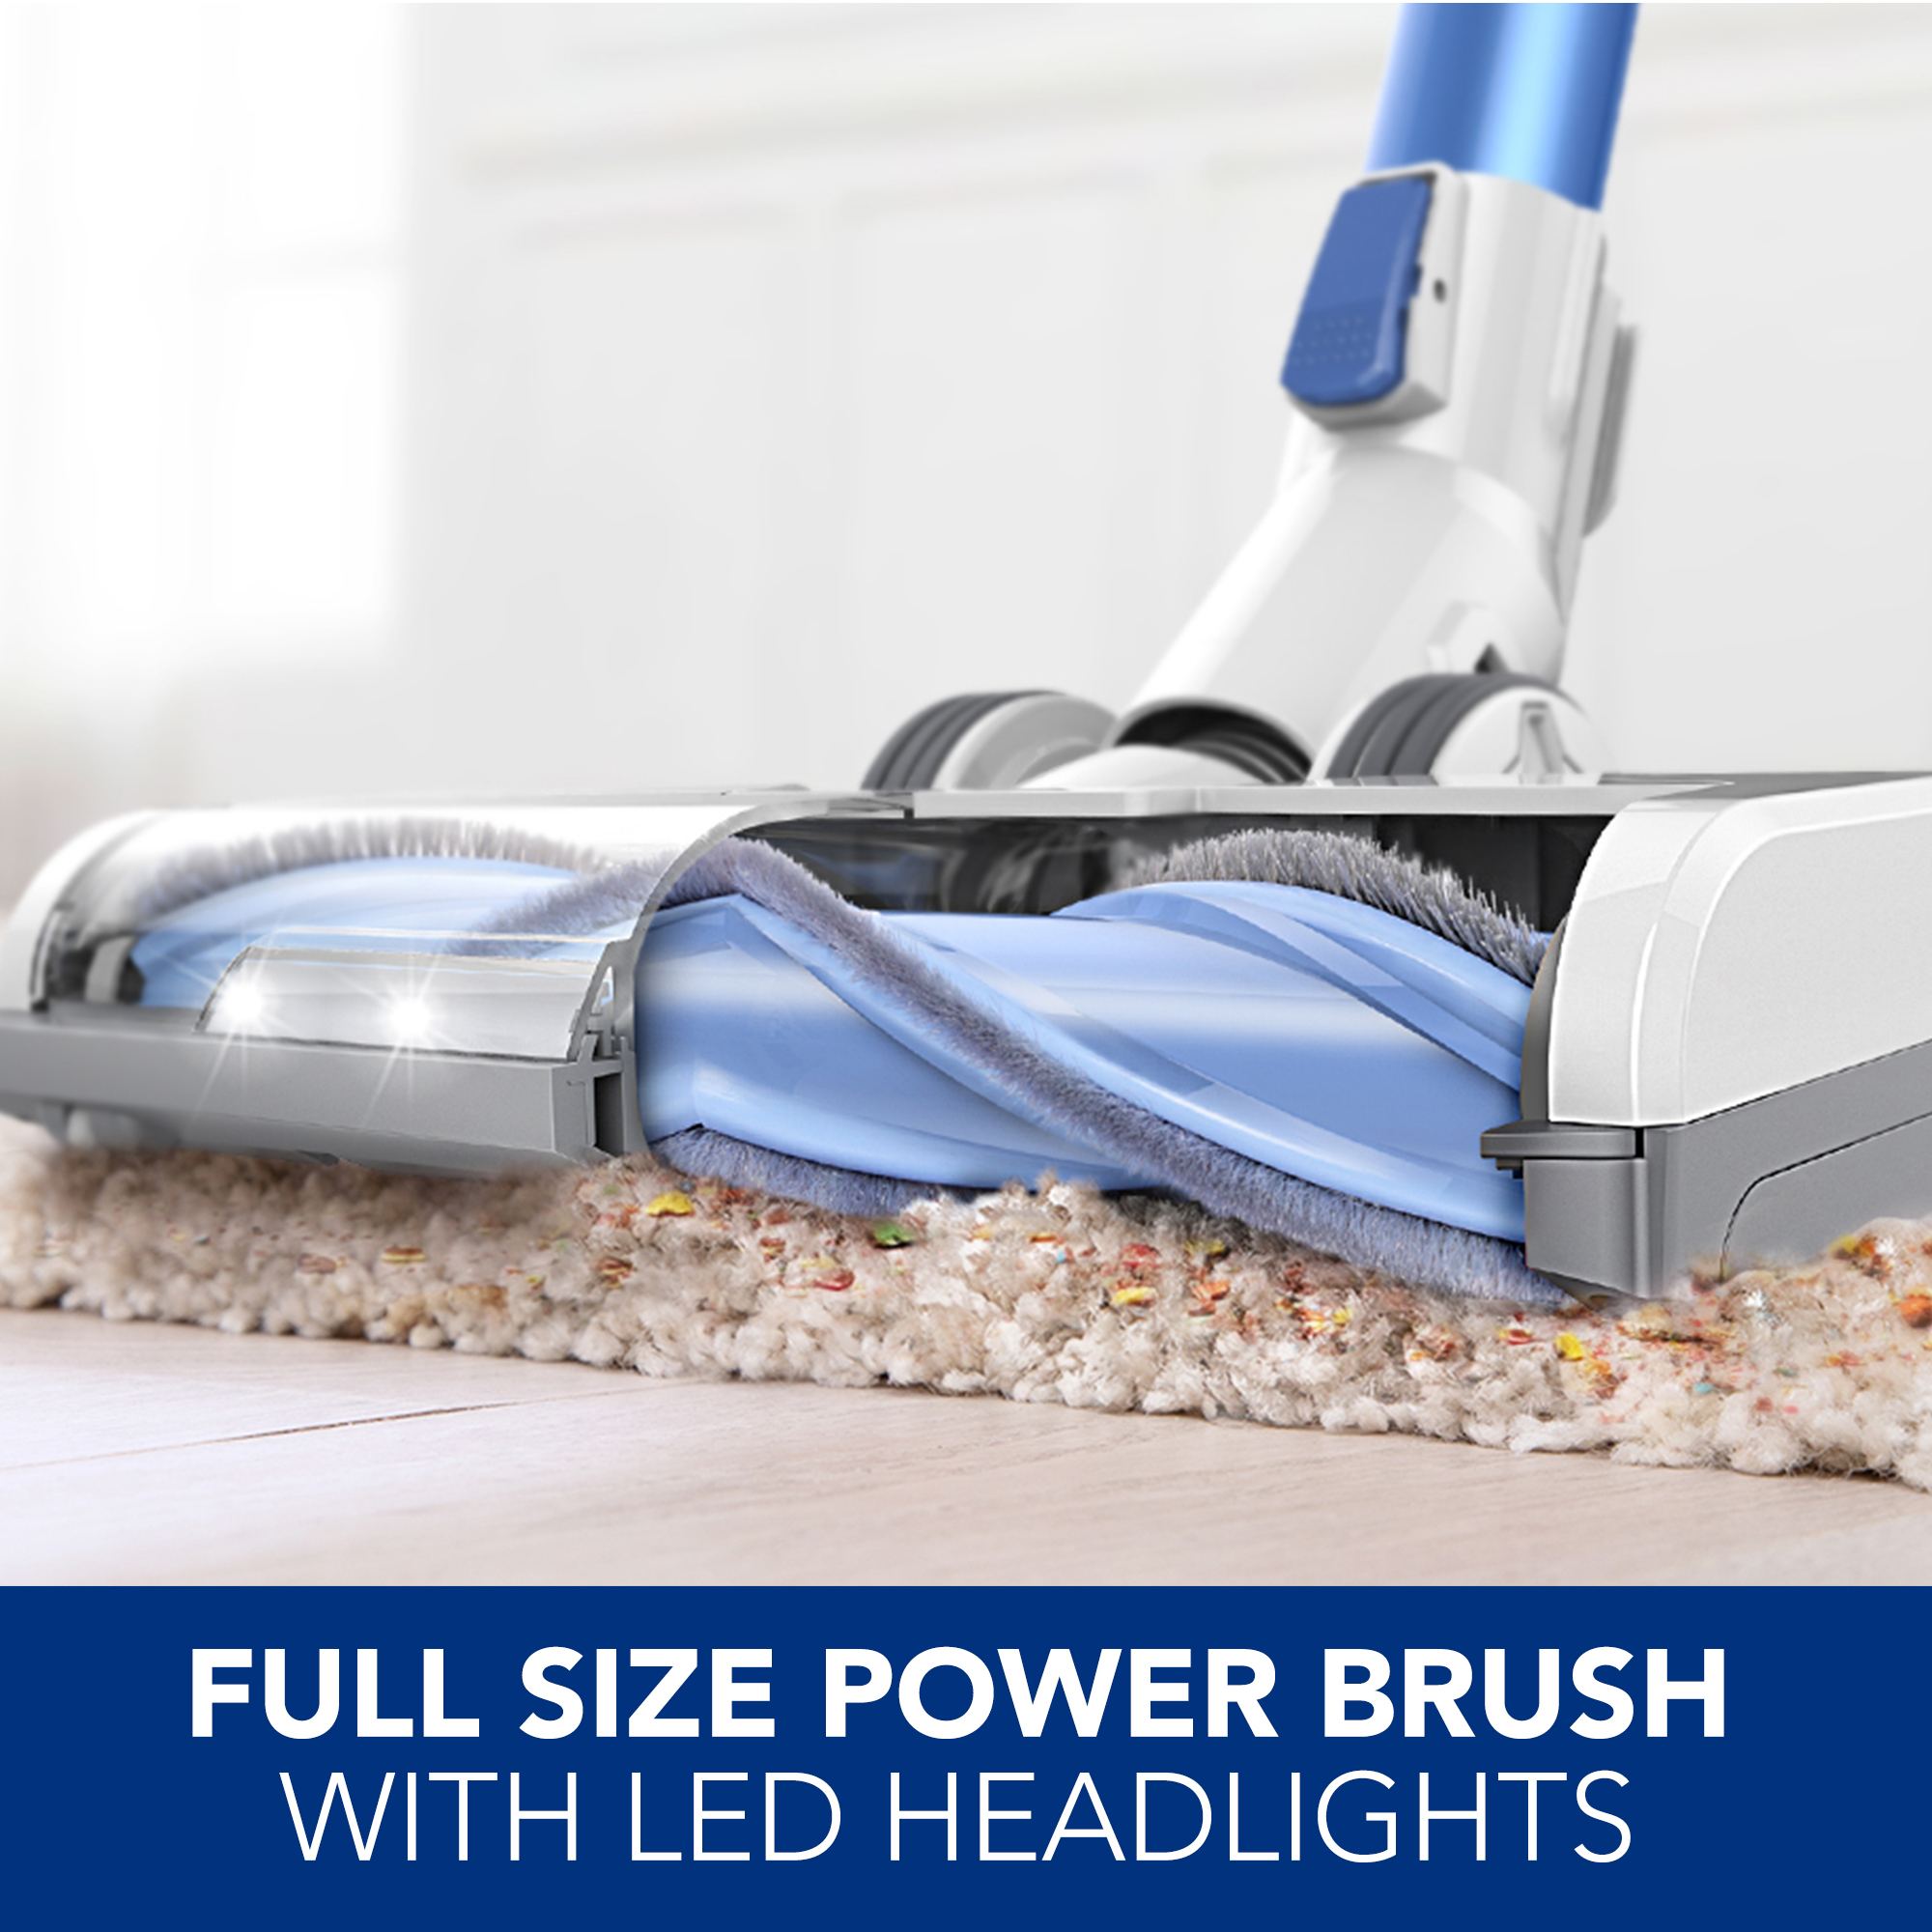 Tineco A10 Hero Lightweight Cordless Stick Vacuum Cleaner - image 5 of 6